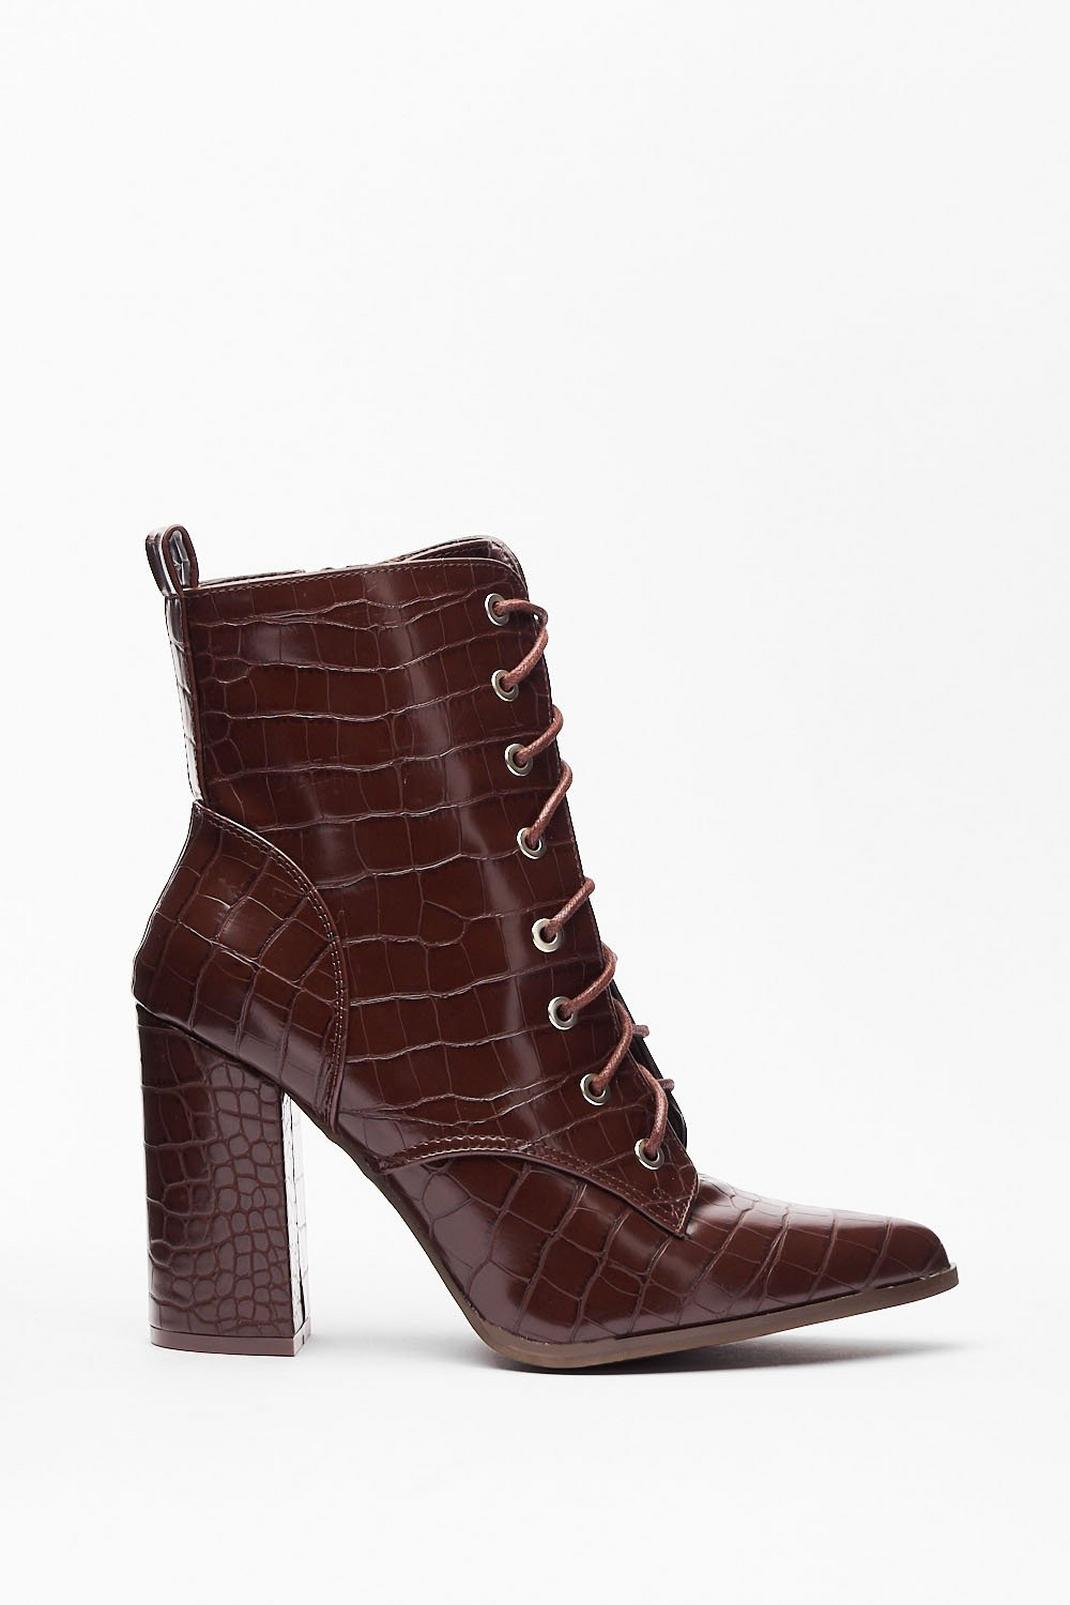 Chocolate Now's Croc the Time Faux Leather Heeled Boots image number 1